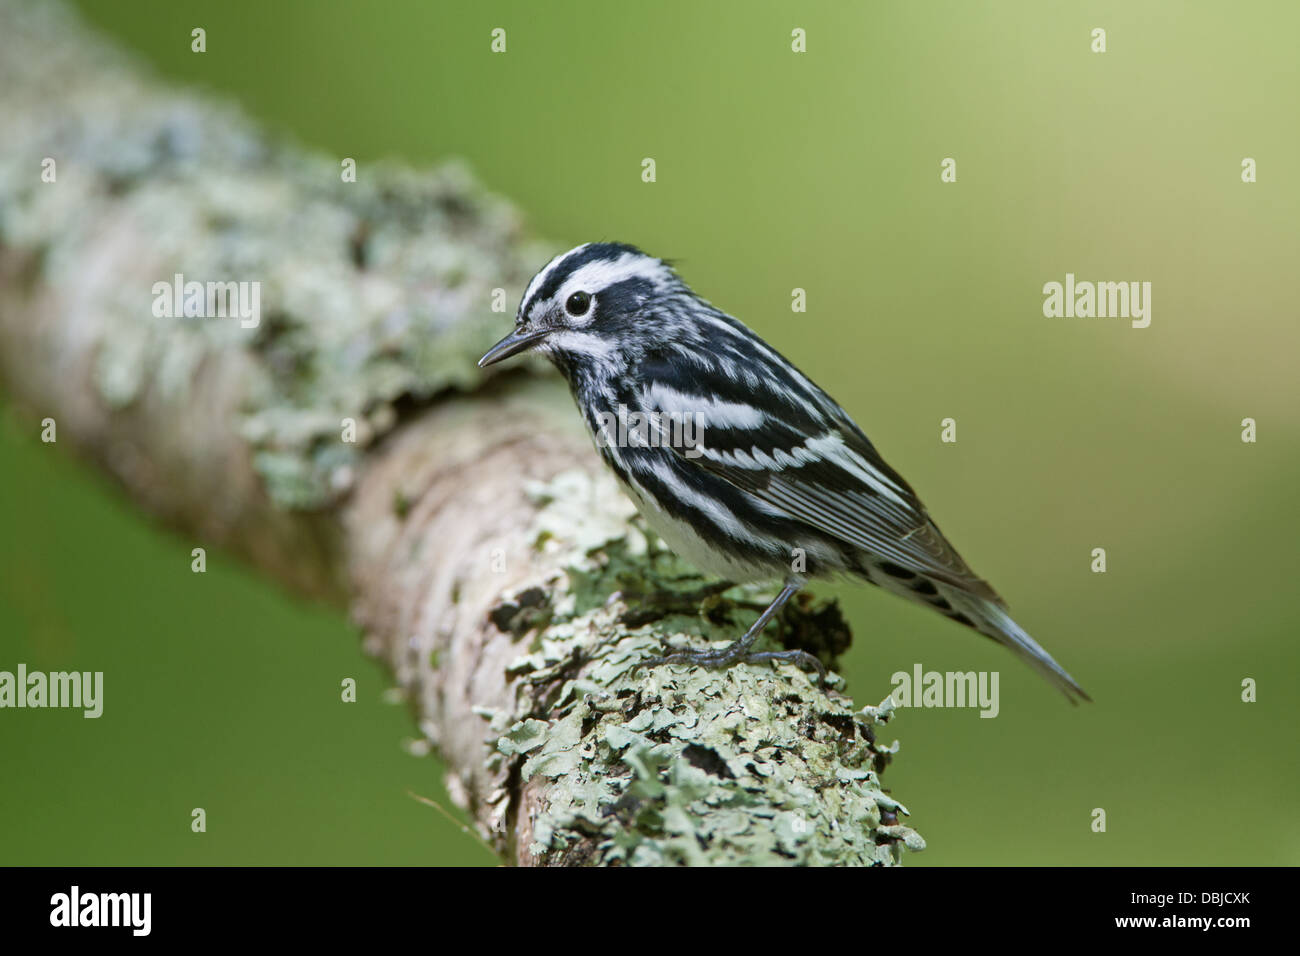 Black and White Warbler perching on Lichen Covered Log Stock Photo